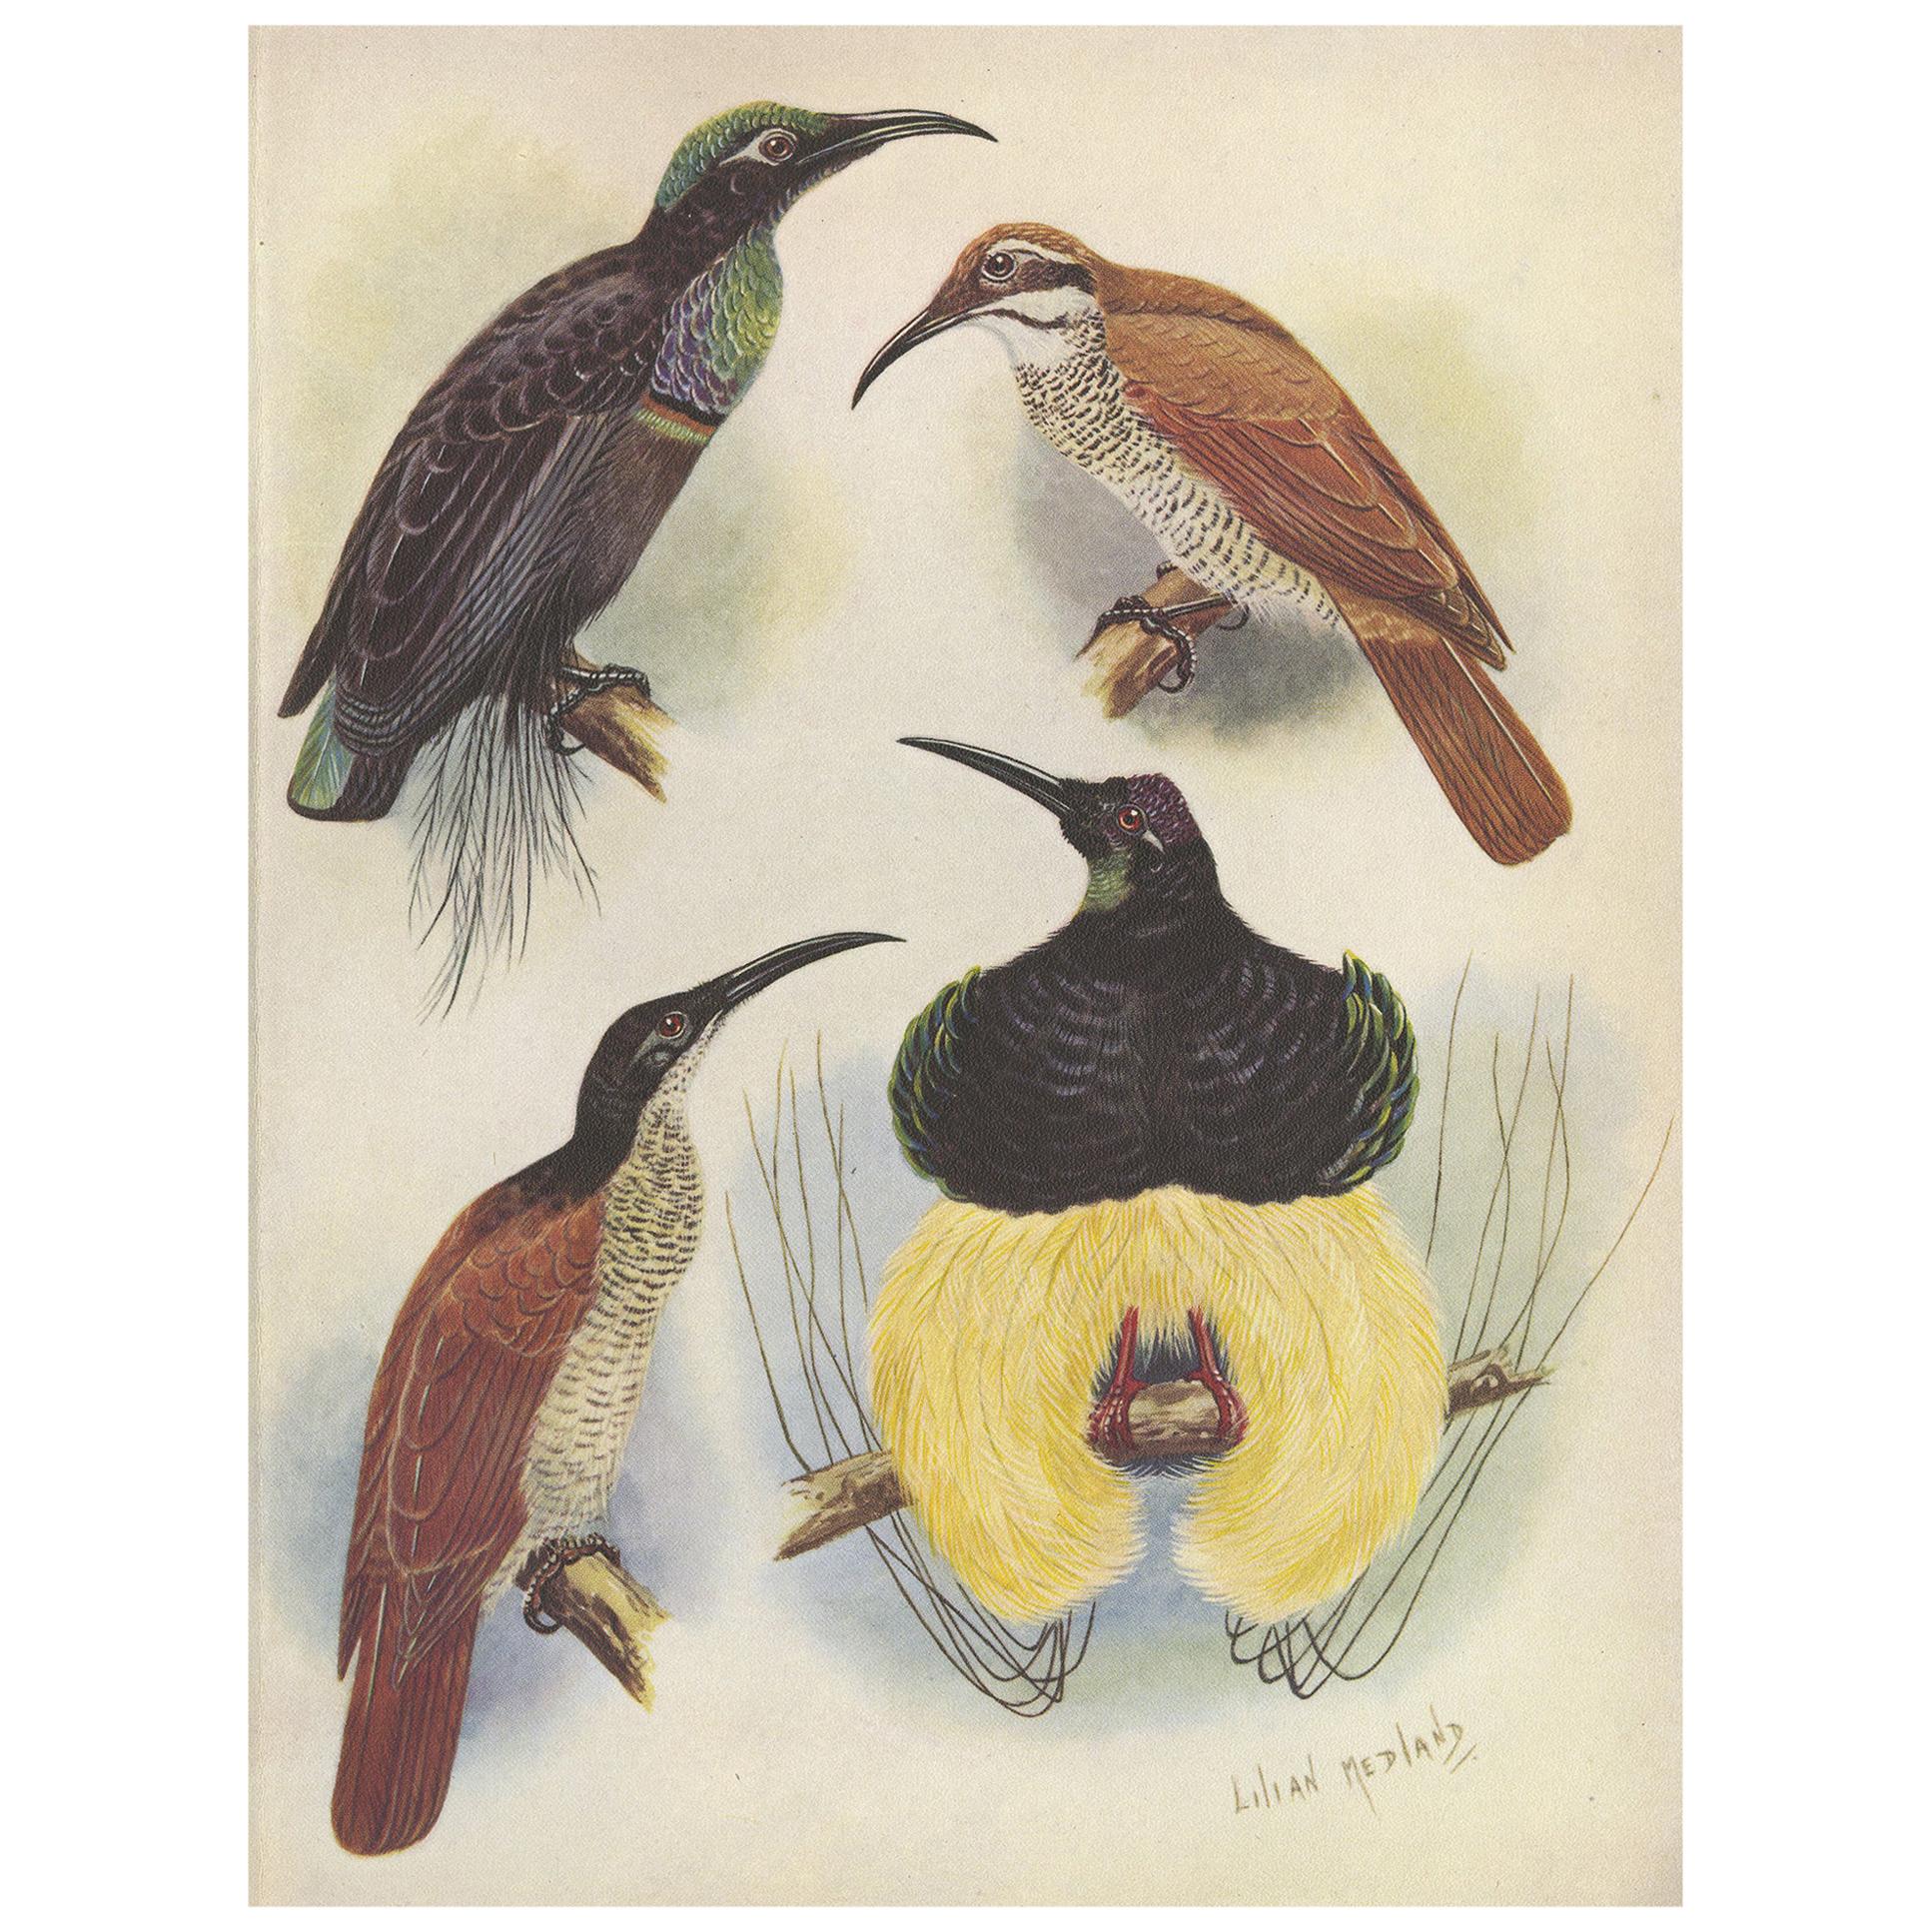 Antique Print of the Magnificent Rifle Bird & the Twelve-Wired Bird of Paradise